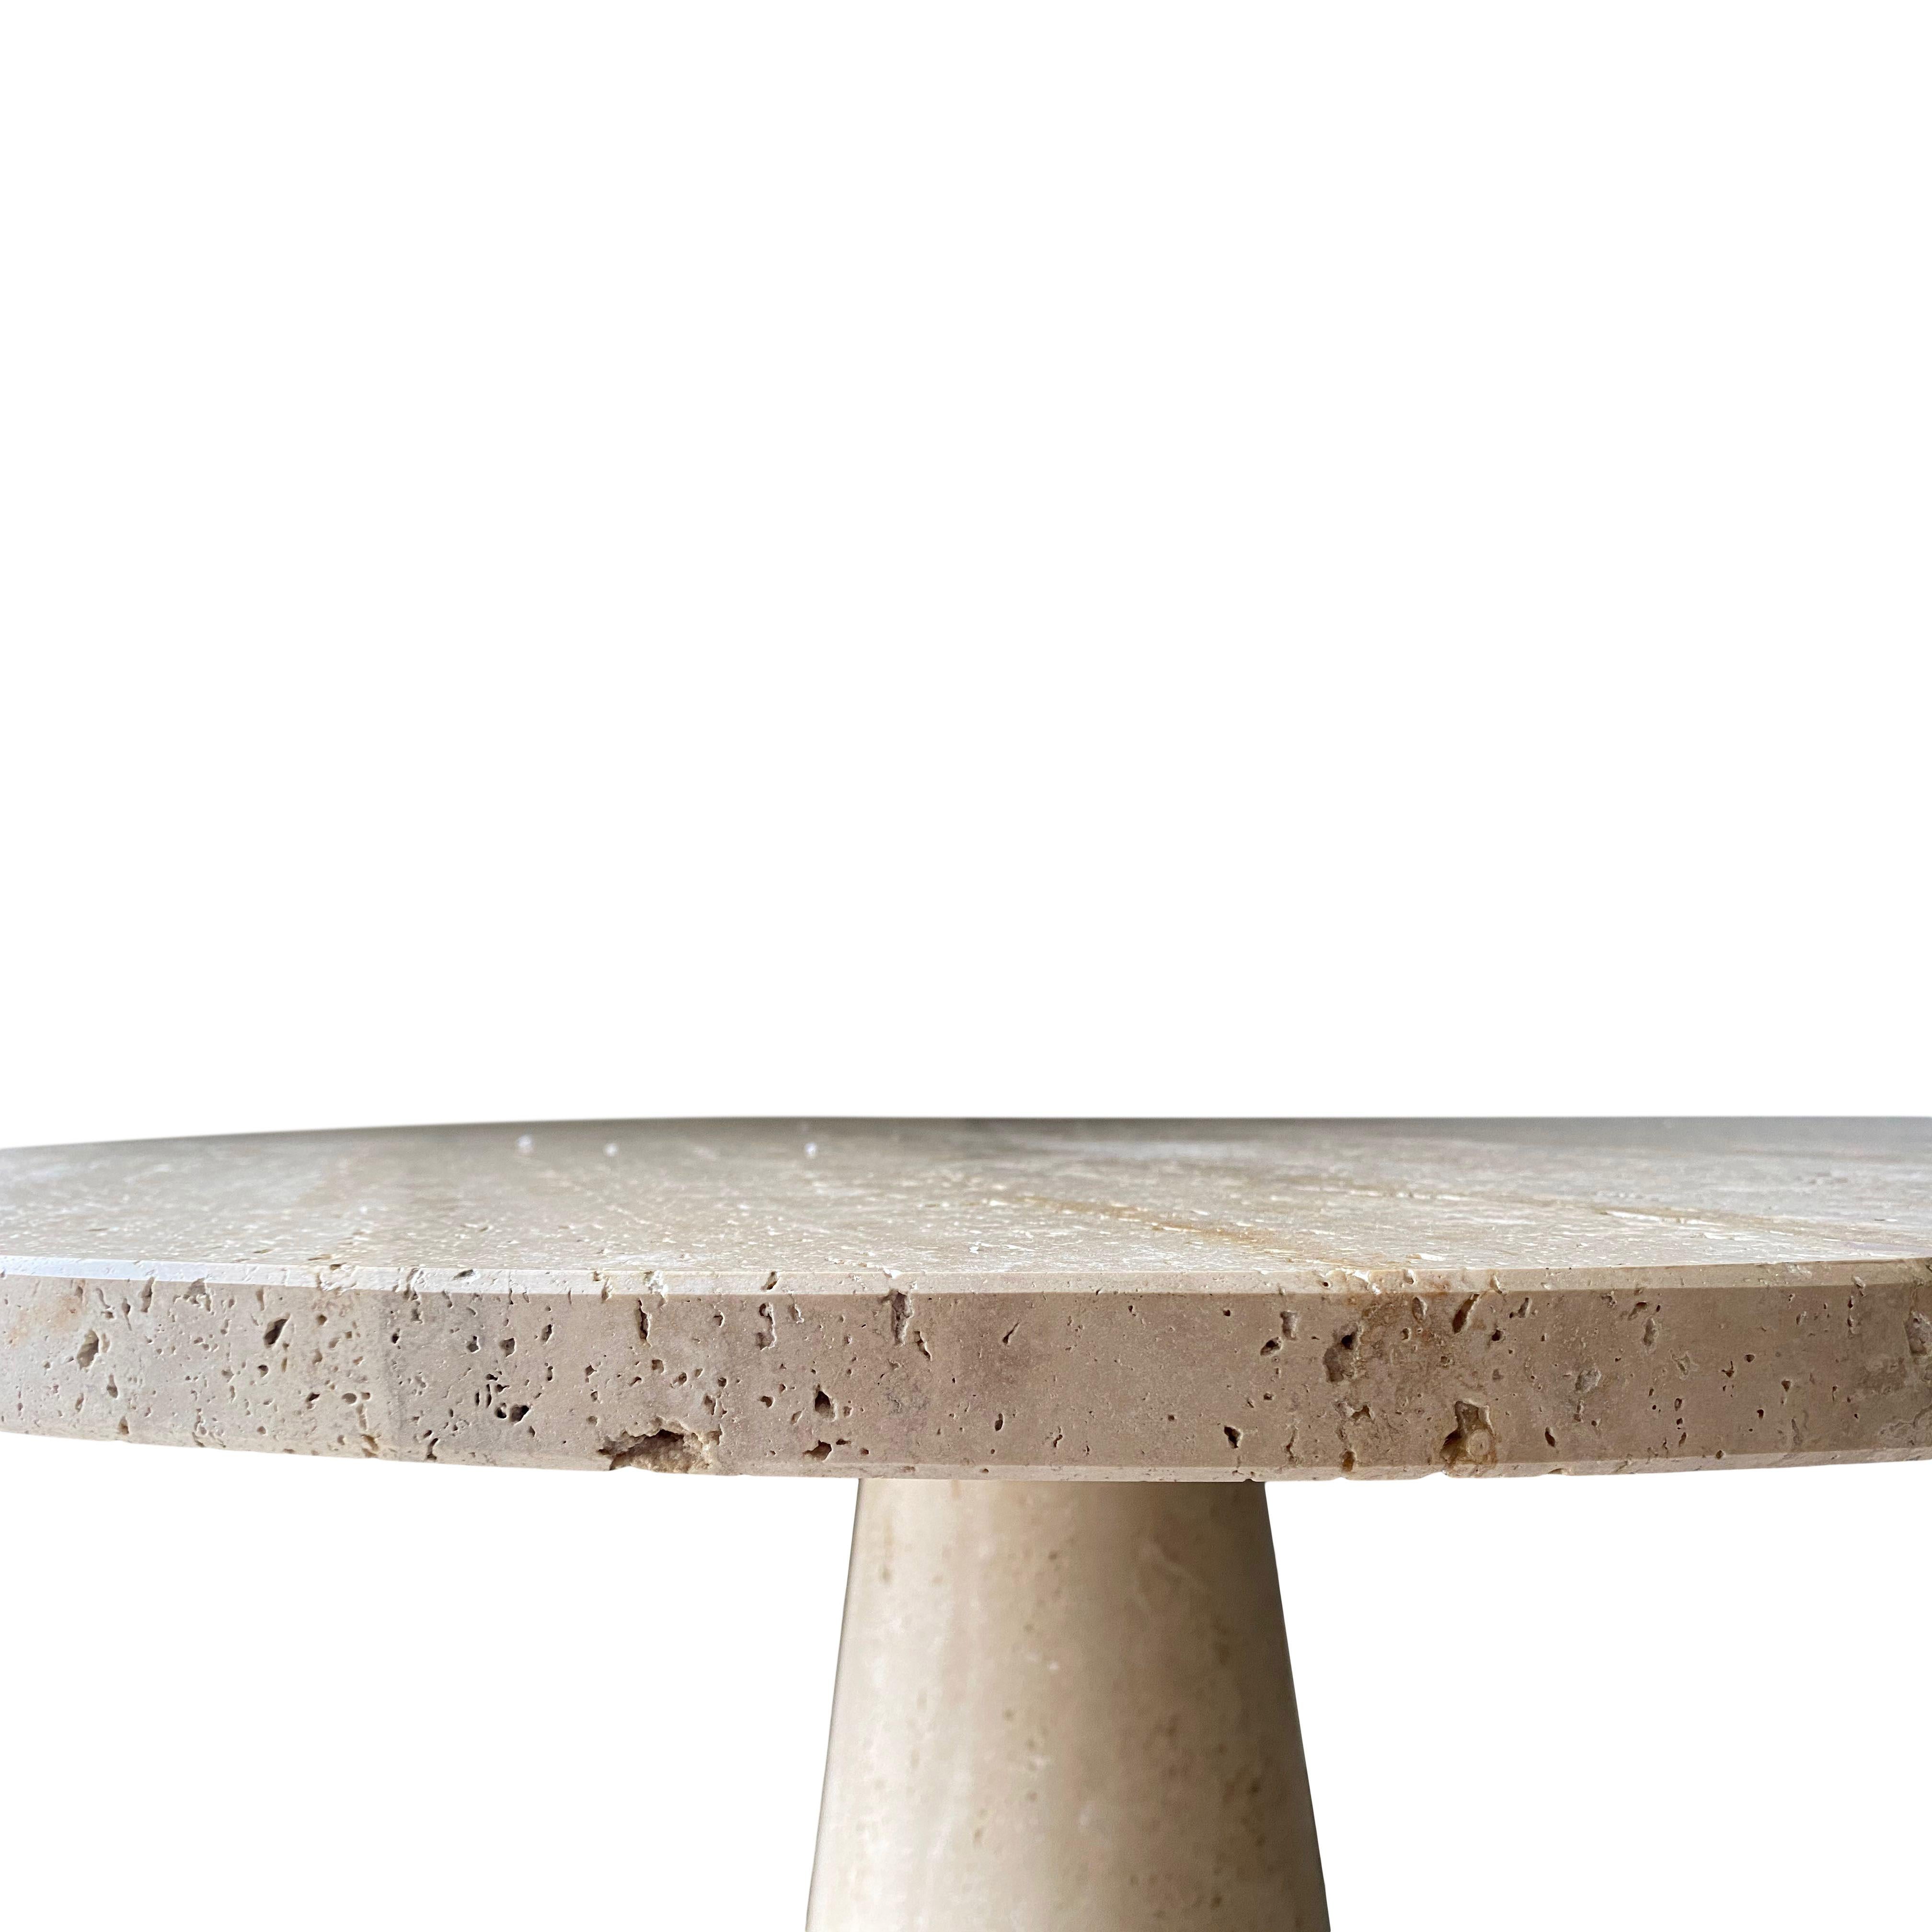 Bespoke Round Italian Dining Table in Travertine In New Condition For Sale In London, London